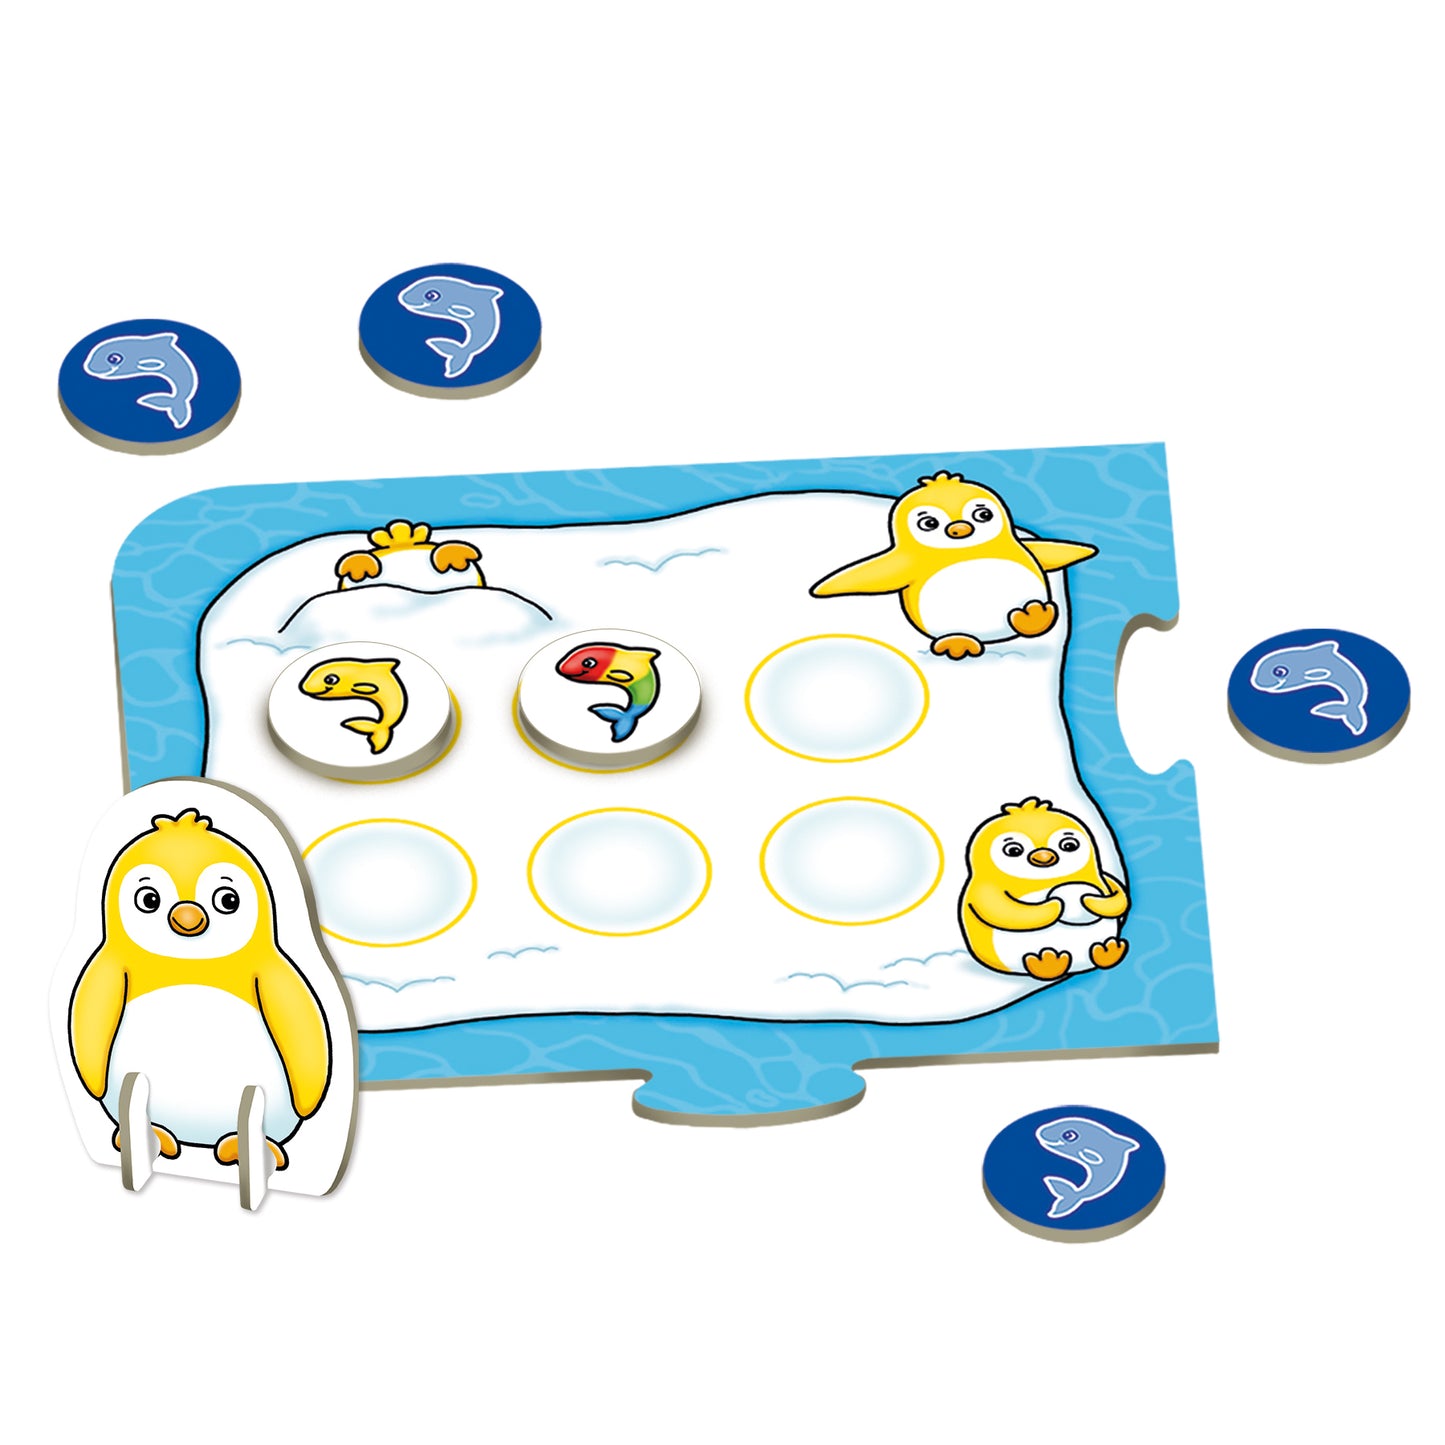 Orchard Toys Hungry Little Penguins Collaborative and Matching Game